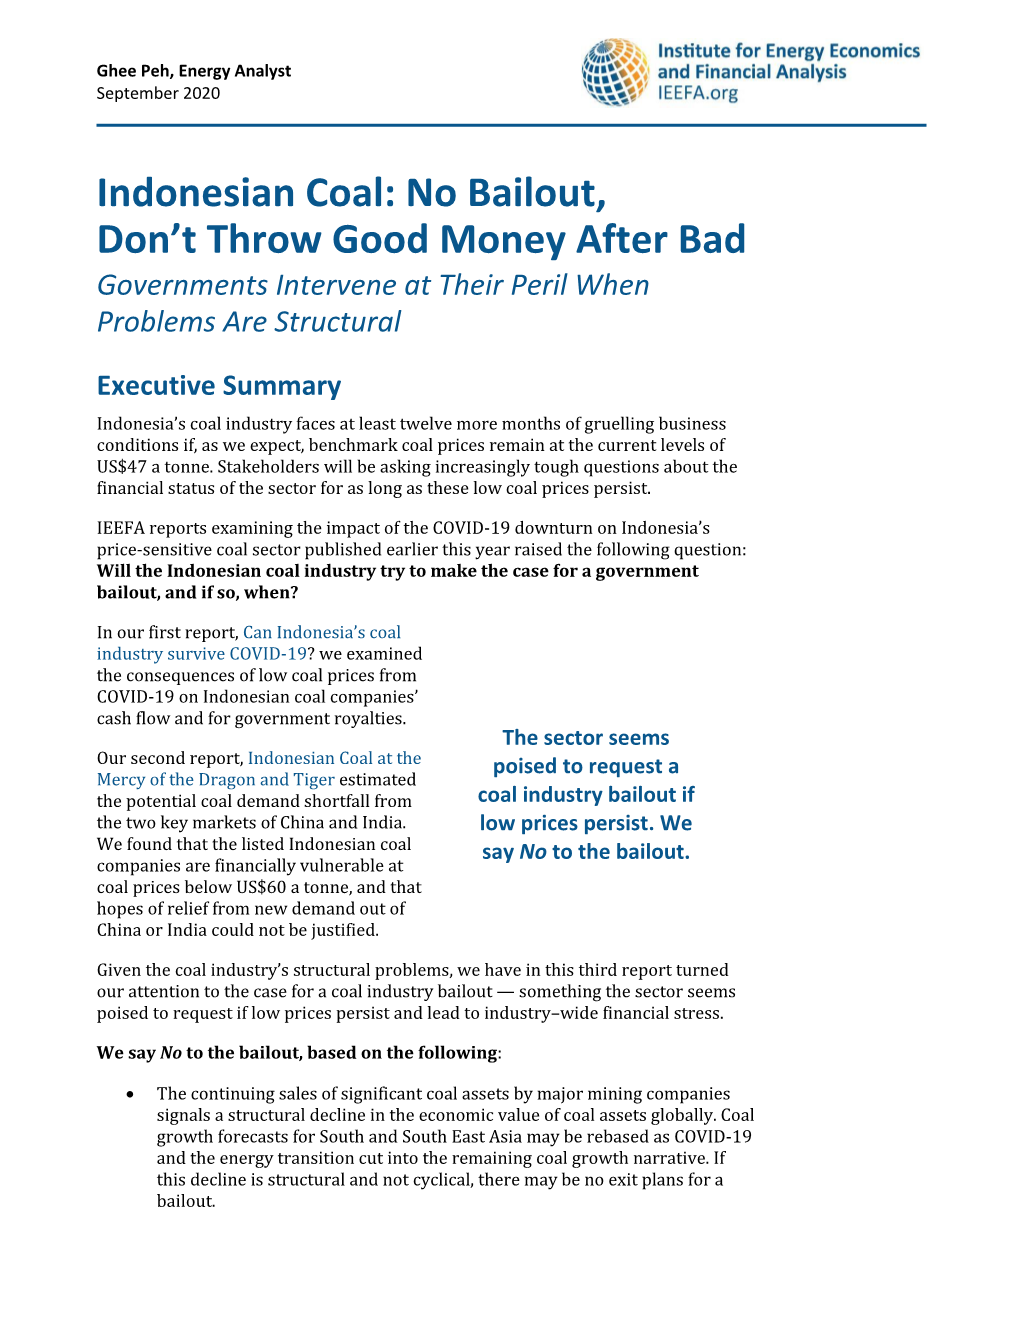 Indonesian Coal: No Bailout, Don’T Throw Good Money After Bad Governments Intervene at Their Peril When Problems Are Structural